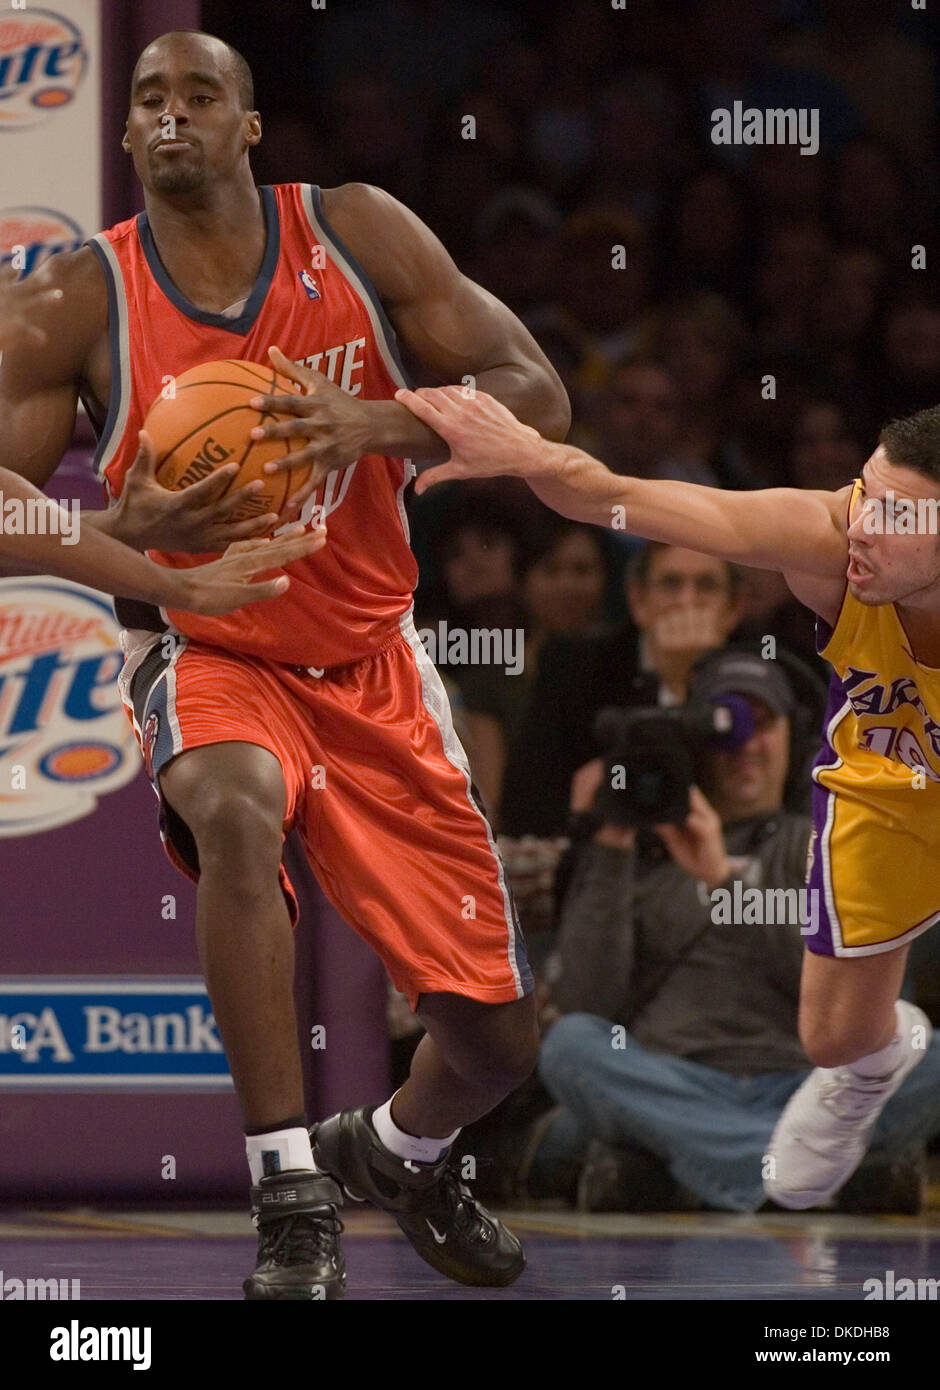 Jan 26, 2007 - Los Angeles, CA, USA - Charlotte Bobcats'  player (50) EMEKA OKAFOR pulls the ball away from Los Angeles Lakers player SASHA VUJACIC in the first  half of their game at the Staples Center in Los Angeles, California. Stock Photo